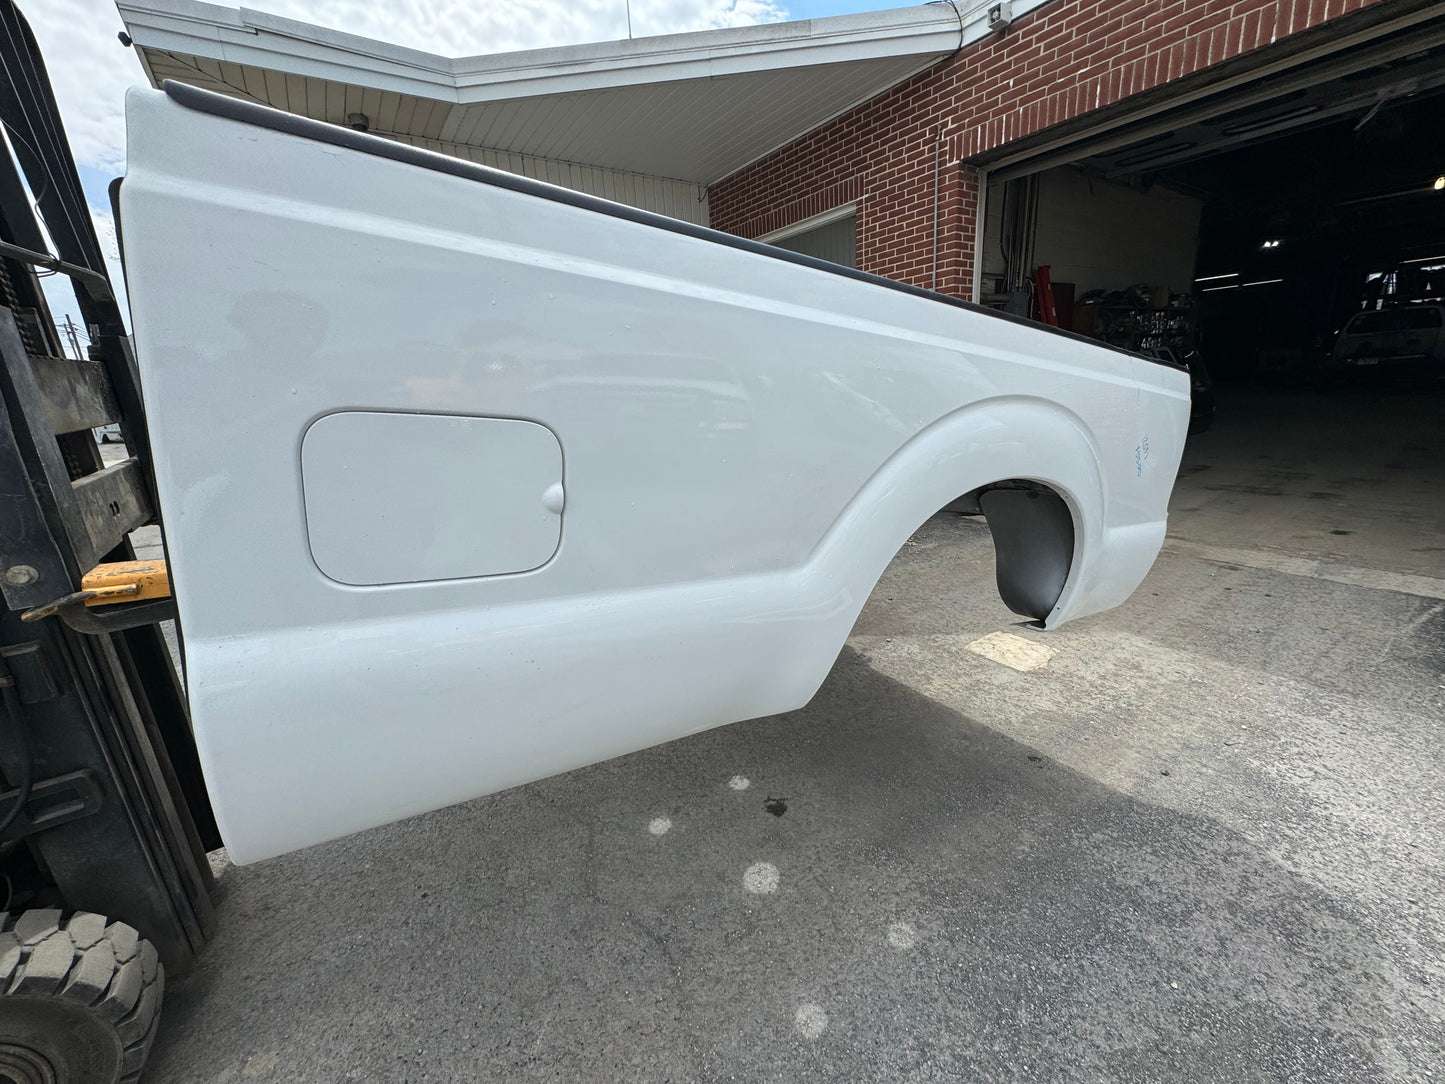 2011-2016 Superduty 8’ bed Oxford white #12593